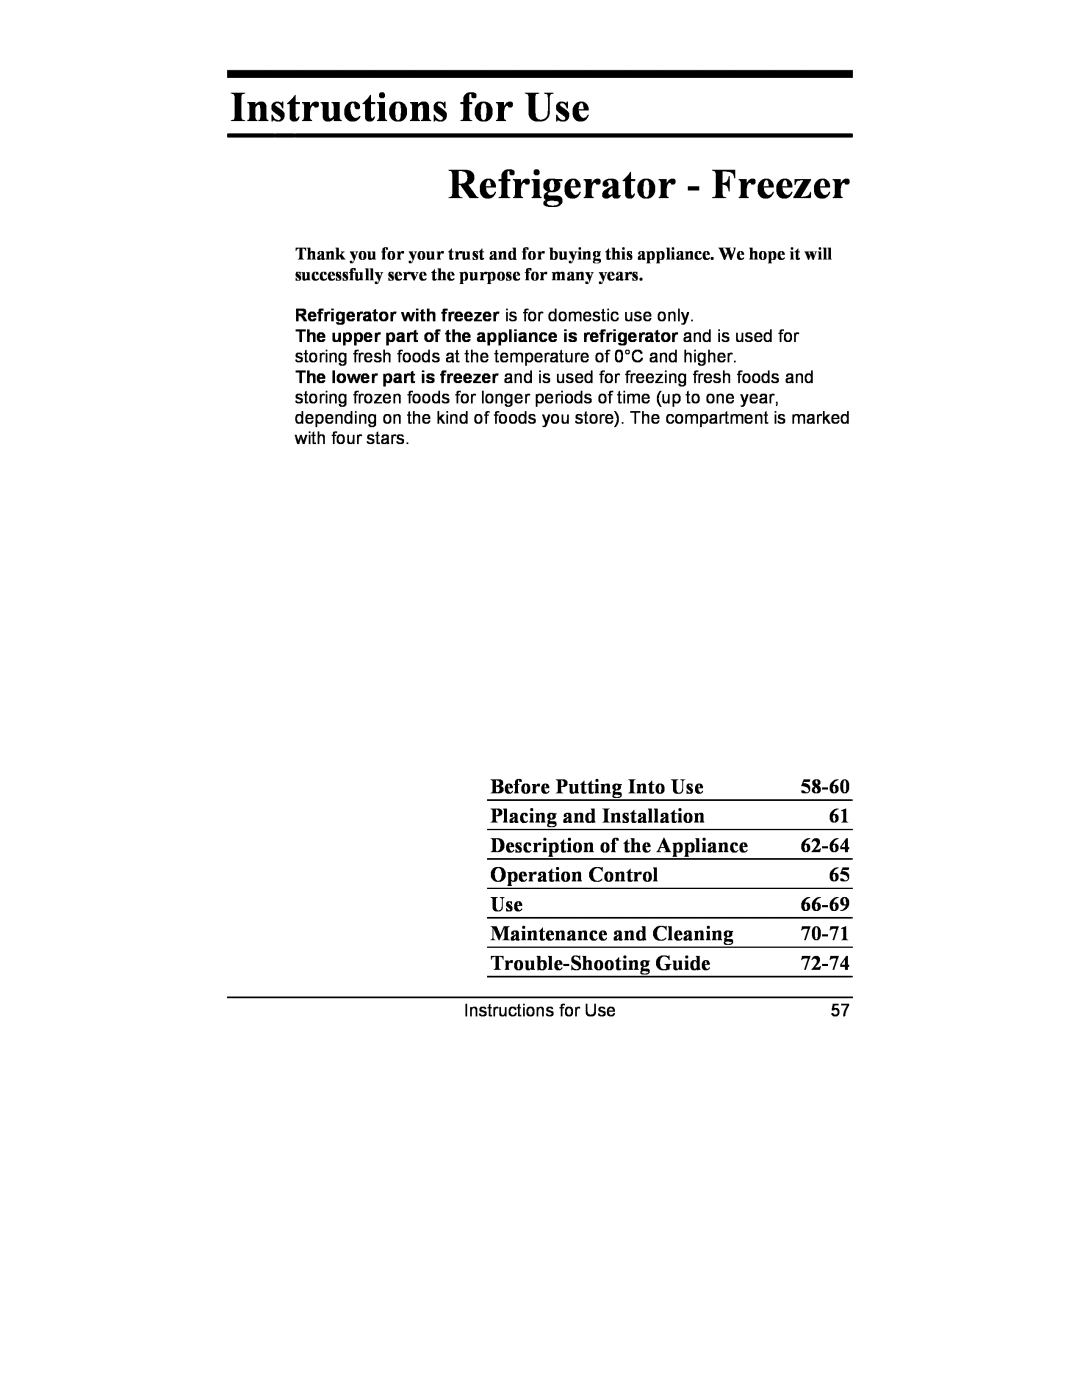 Smeg CR321A manual Instructions for Use Refrigerator - Freezer, Before Putting Into Use, 58-60, Placing and Installation 